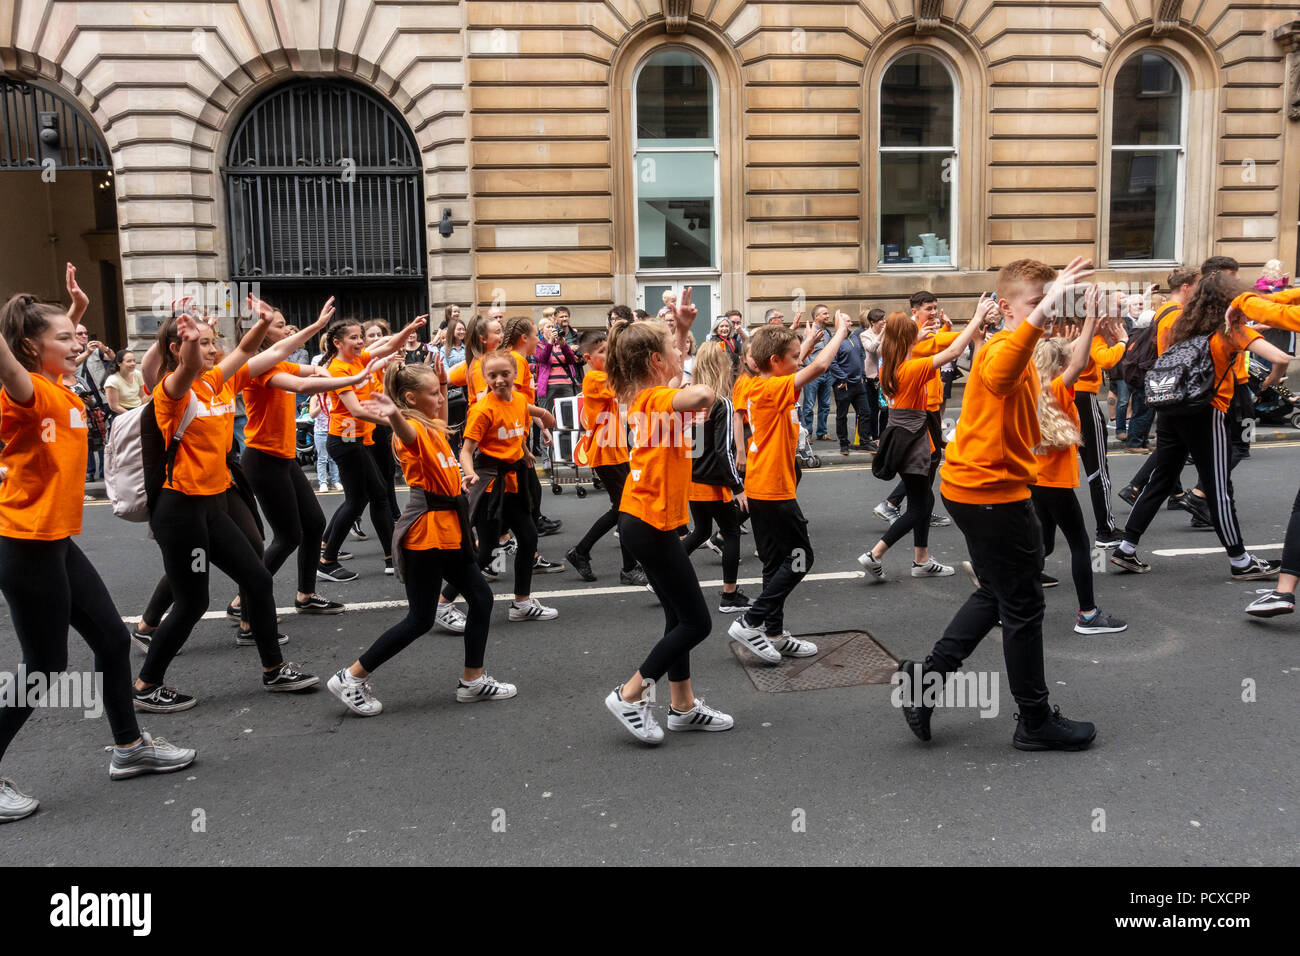 Glasgow, Scotland, UK. 04th August 2018. Young dancers from Urbaniks street dance school in Milngavie dancing backwards in Merchant City. They were participating in the Carnival Procession of the Merchant City Festival. The festival is part of Festival 2018 a city-wide cultural event running in parallel with Glasgow 2018, the European Championships. Credit: Elizabeth Leyden/Alamy Live News Stock Photo